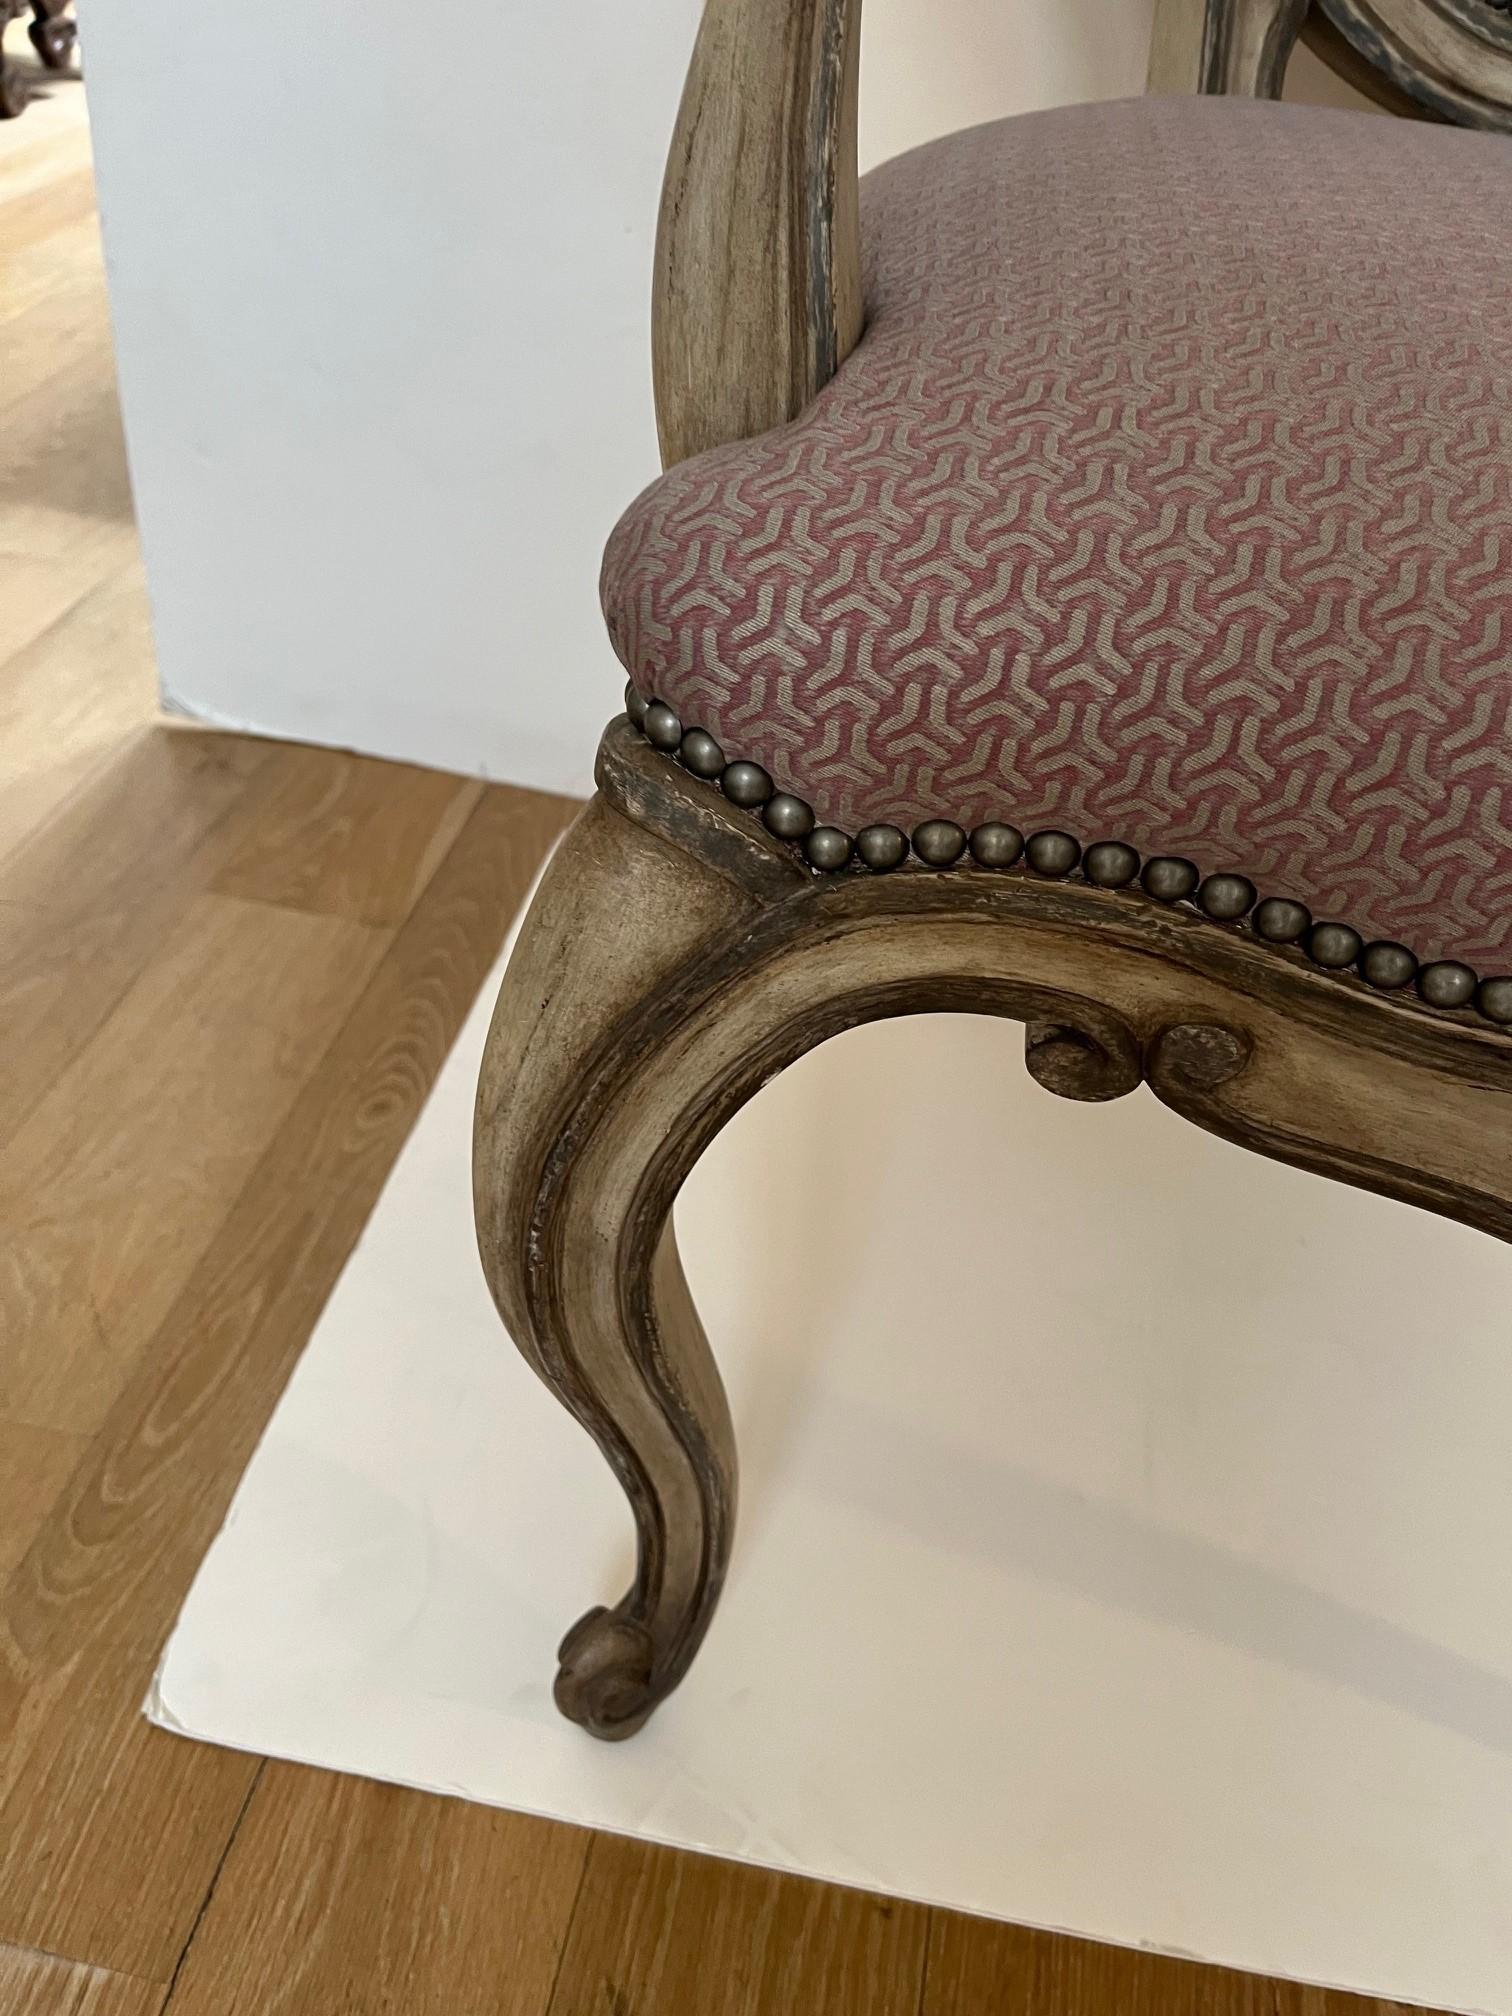 Made to order Louis XV Style Dining Armchair Upholstered in Fortuny Fabrics with Antique Brass Nail Heads Trim at Seat and Inside Oval Back and Arm Rest, Finished in Antiqued Painted Finish, Chair Frame is Solid Wood.
Upholstery: Customer Own